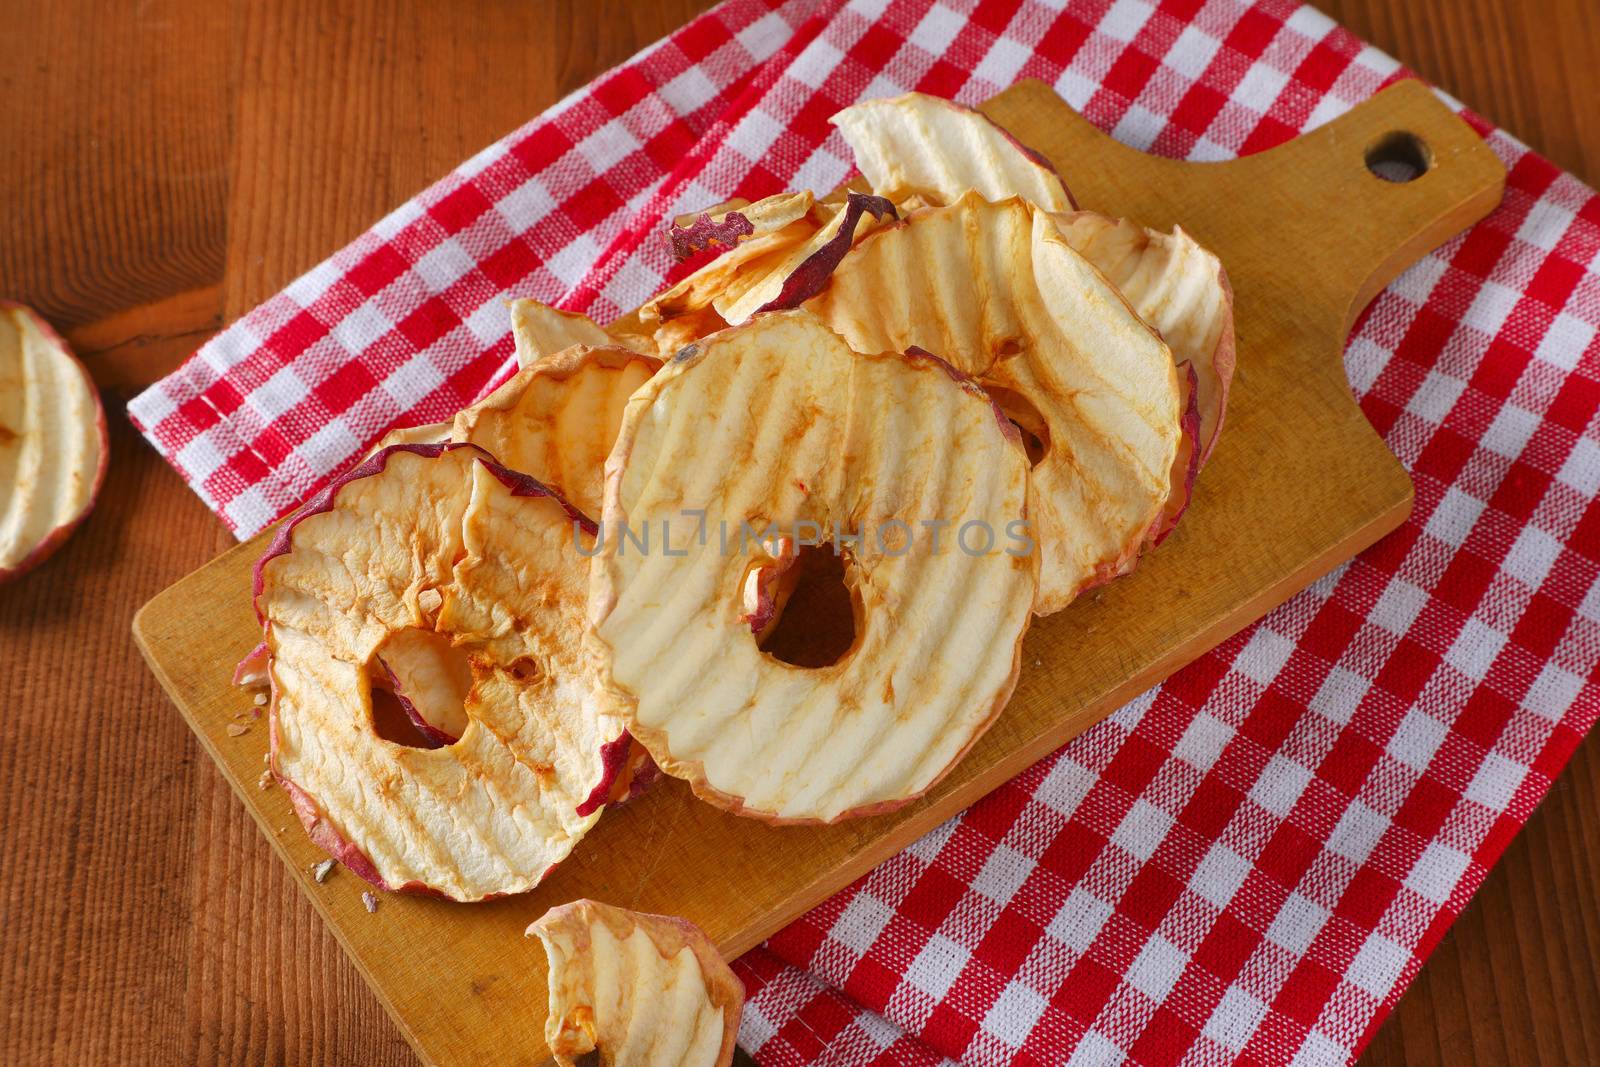 Dried apple chips or rings on cutting board